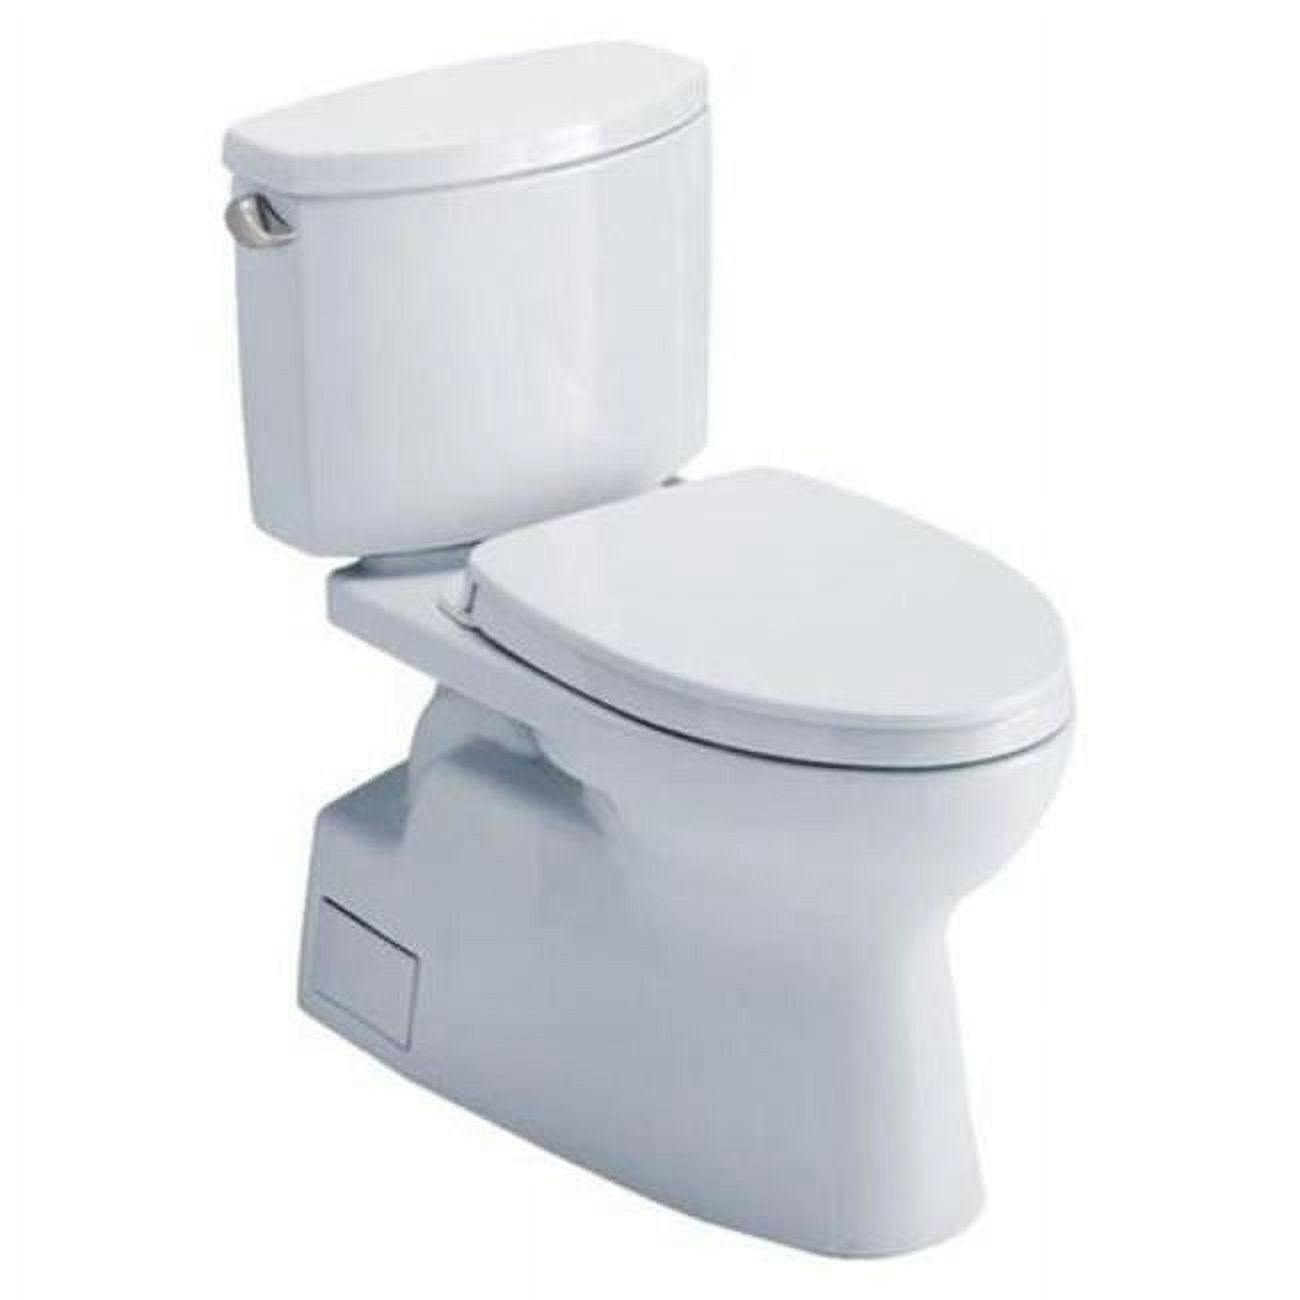 Elongated Bone Two-Piece High-Efficiency Toilet with Skirted Design